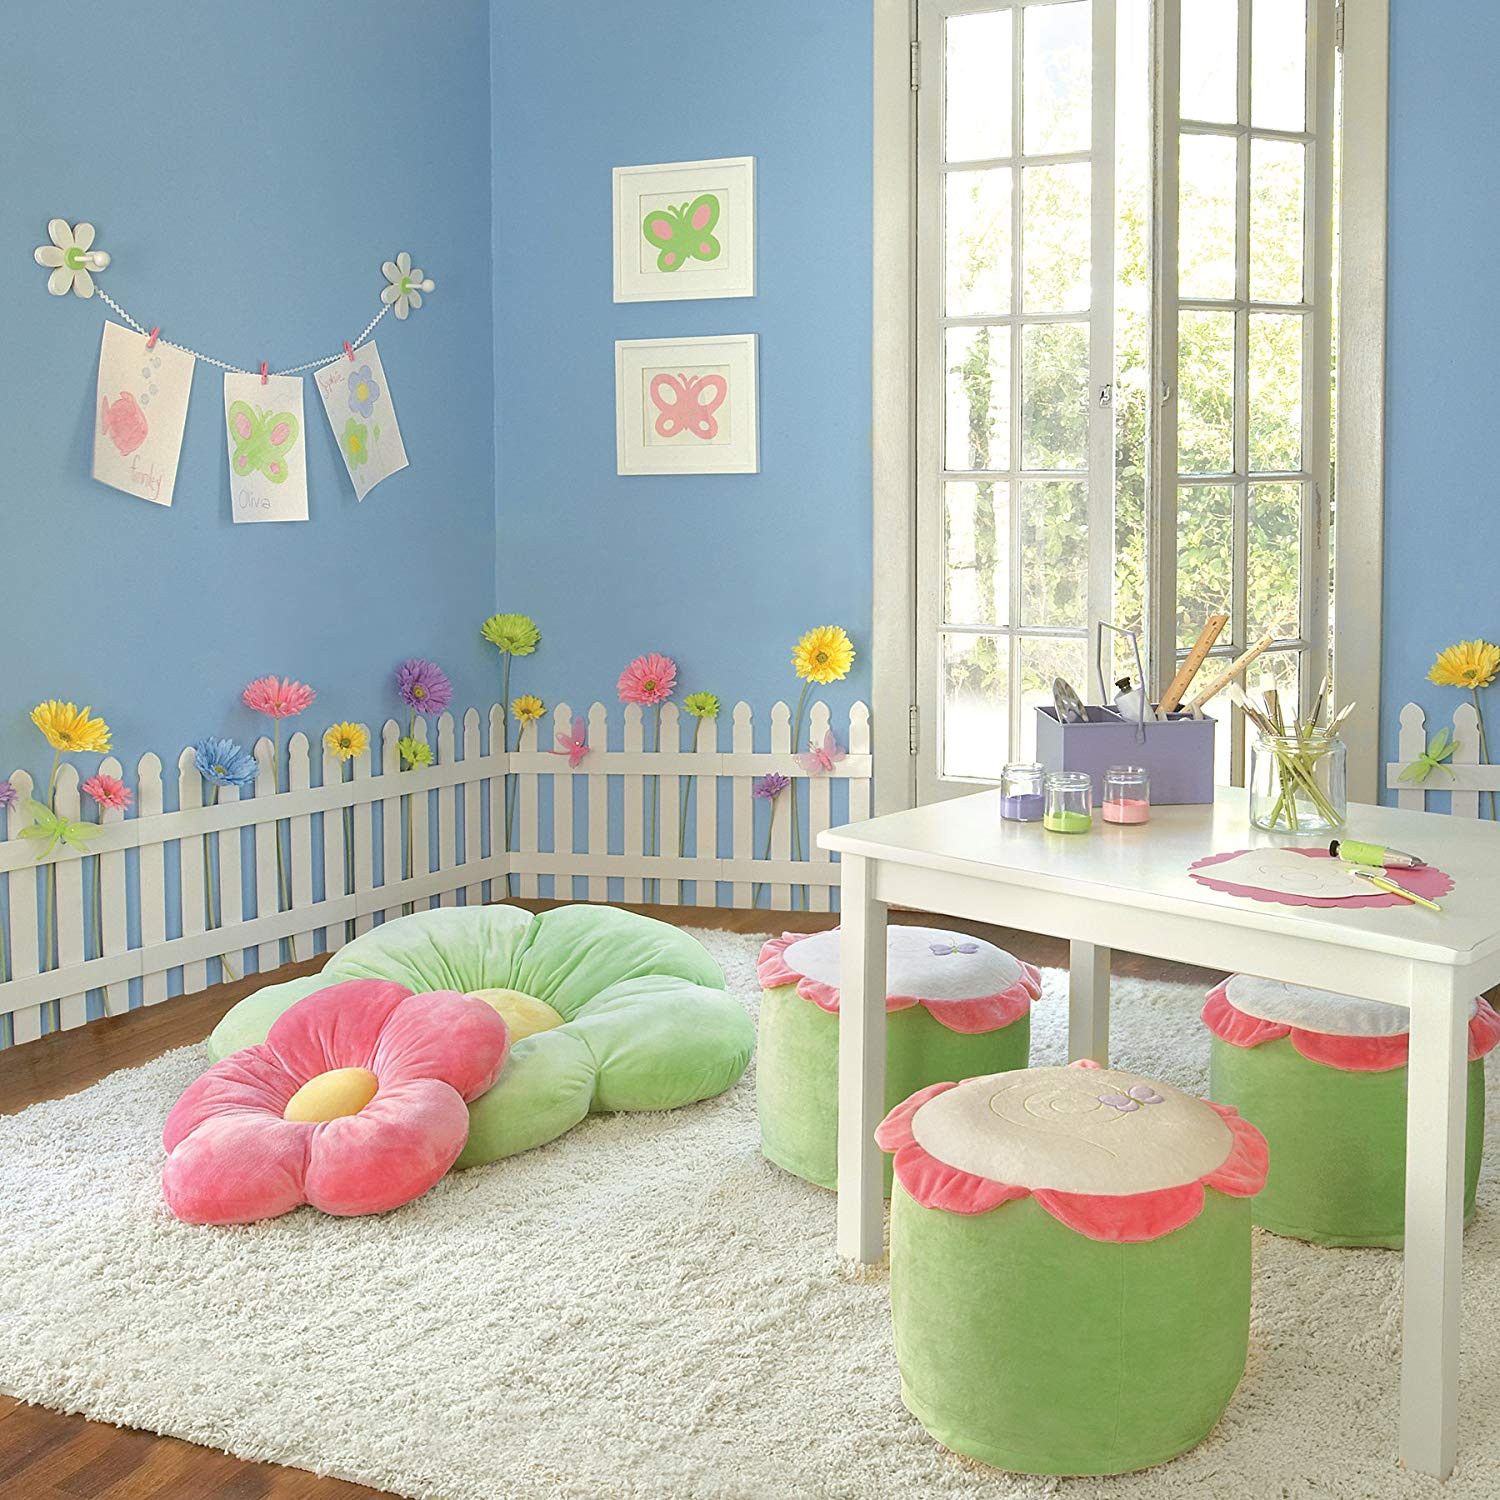 Wall Decoration For Kids Room
 White Wooden Picket Fences for Kids Room Wall Border